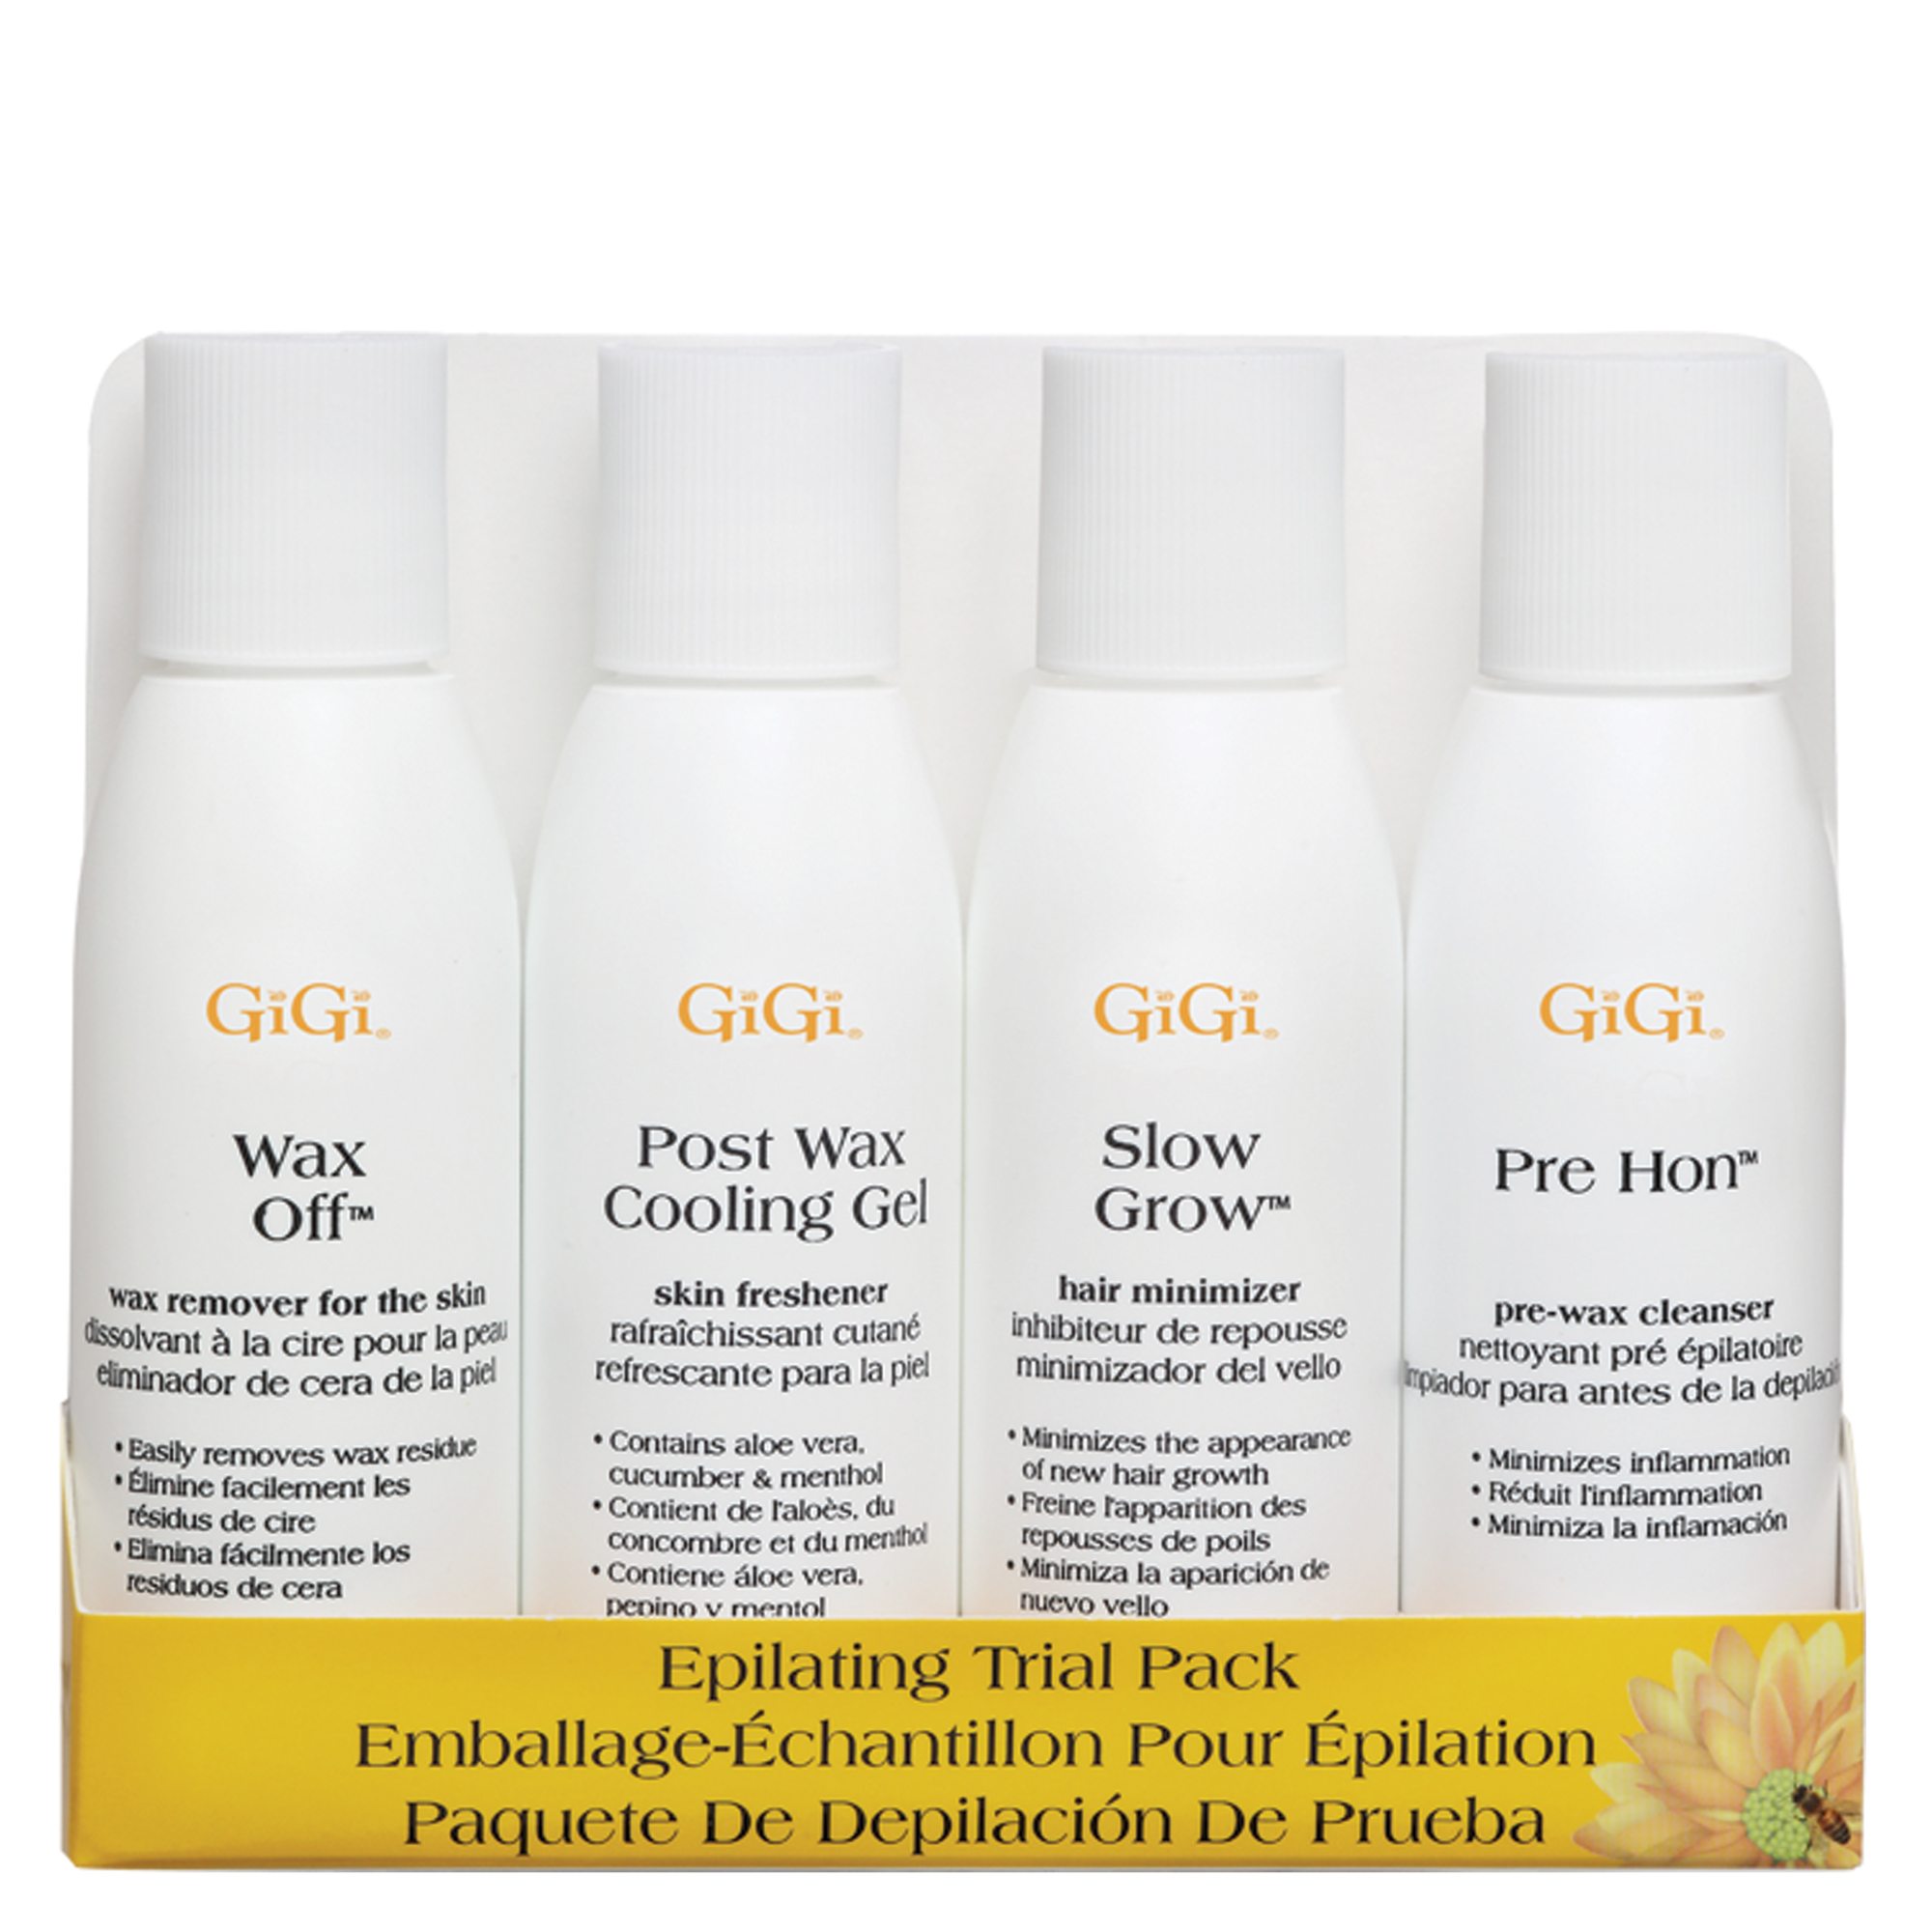 Epilating Lotion Trial Pack